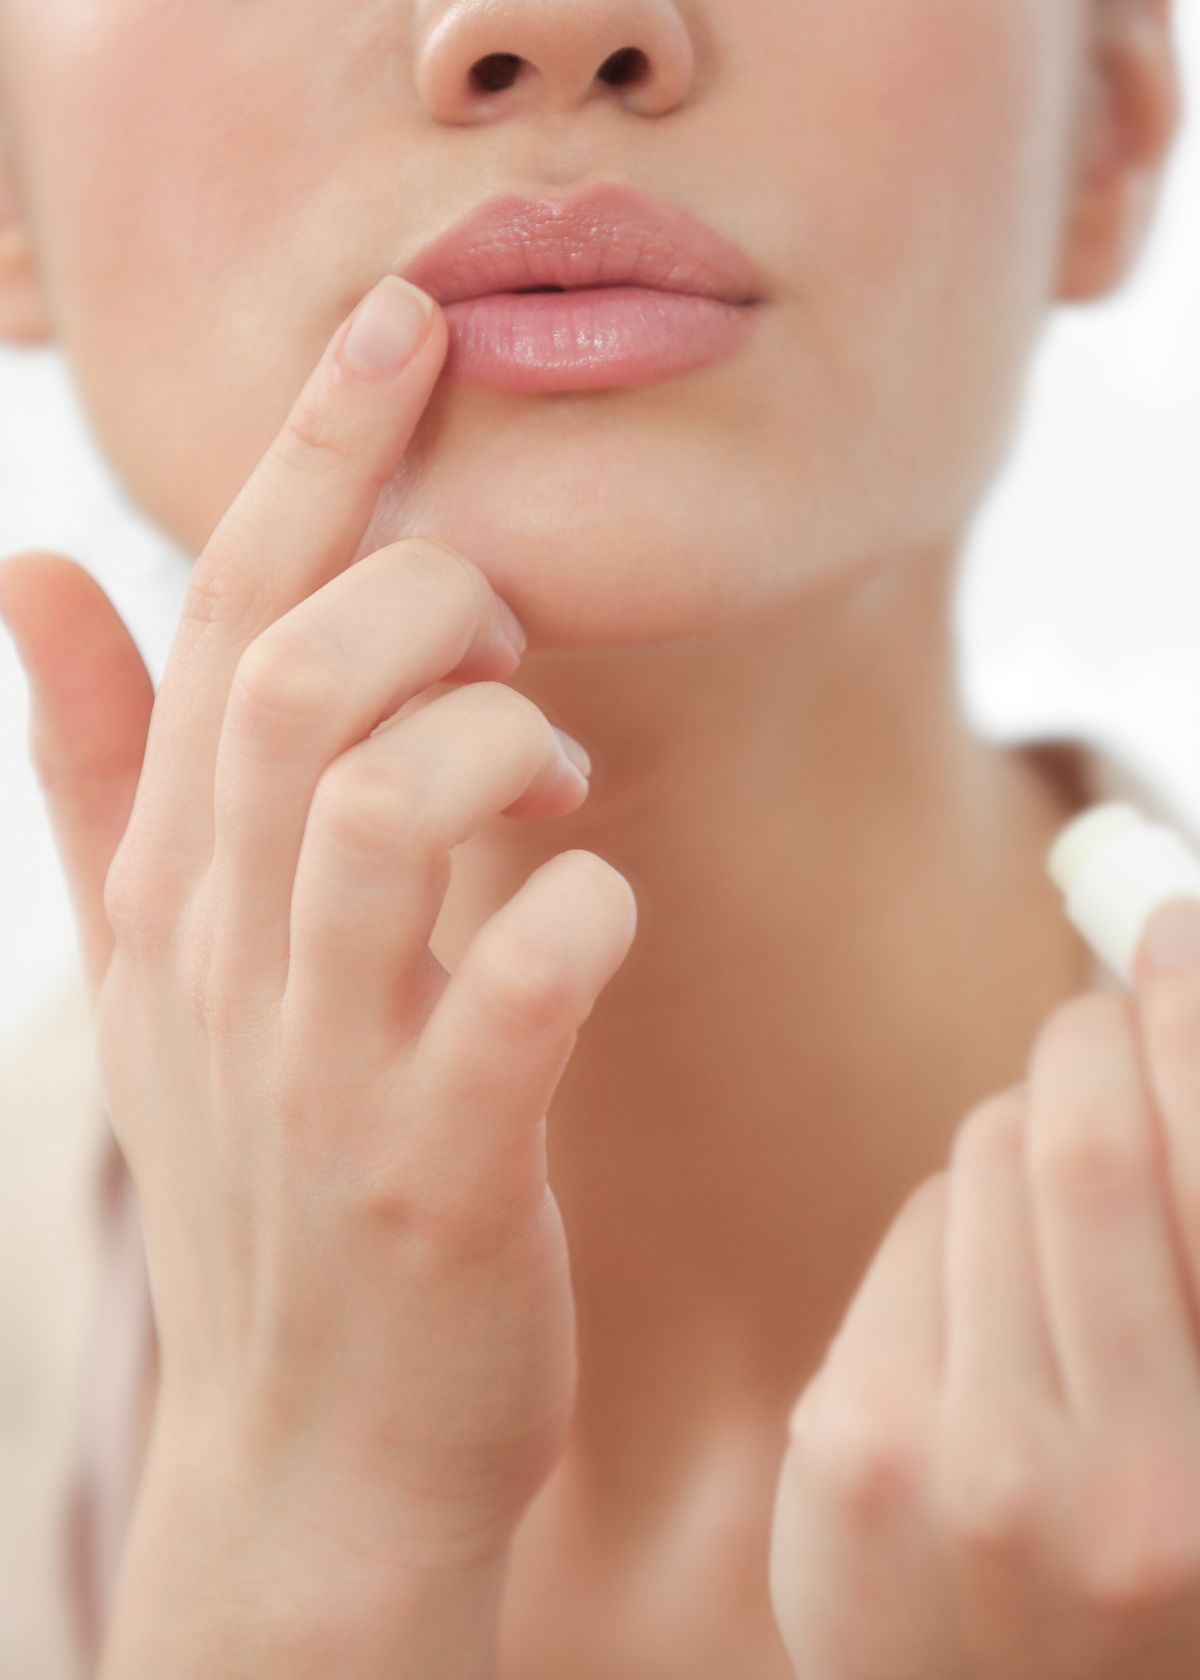 Can You Put Hand Lotion on Your Lips?